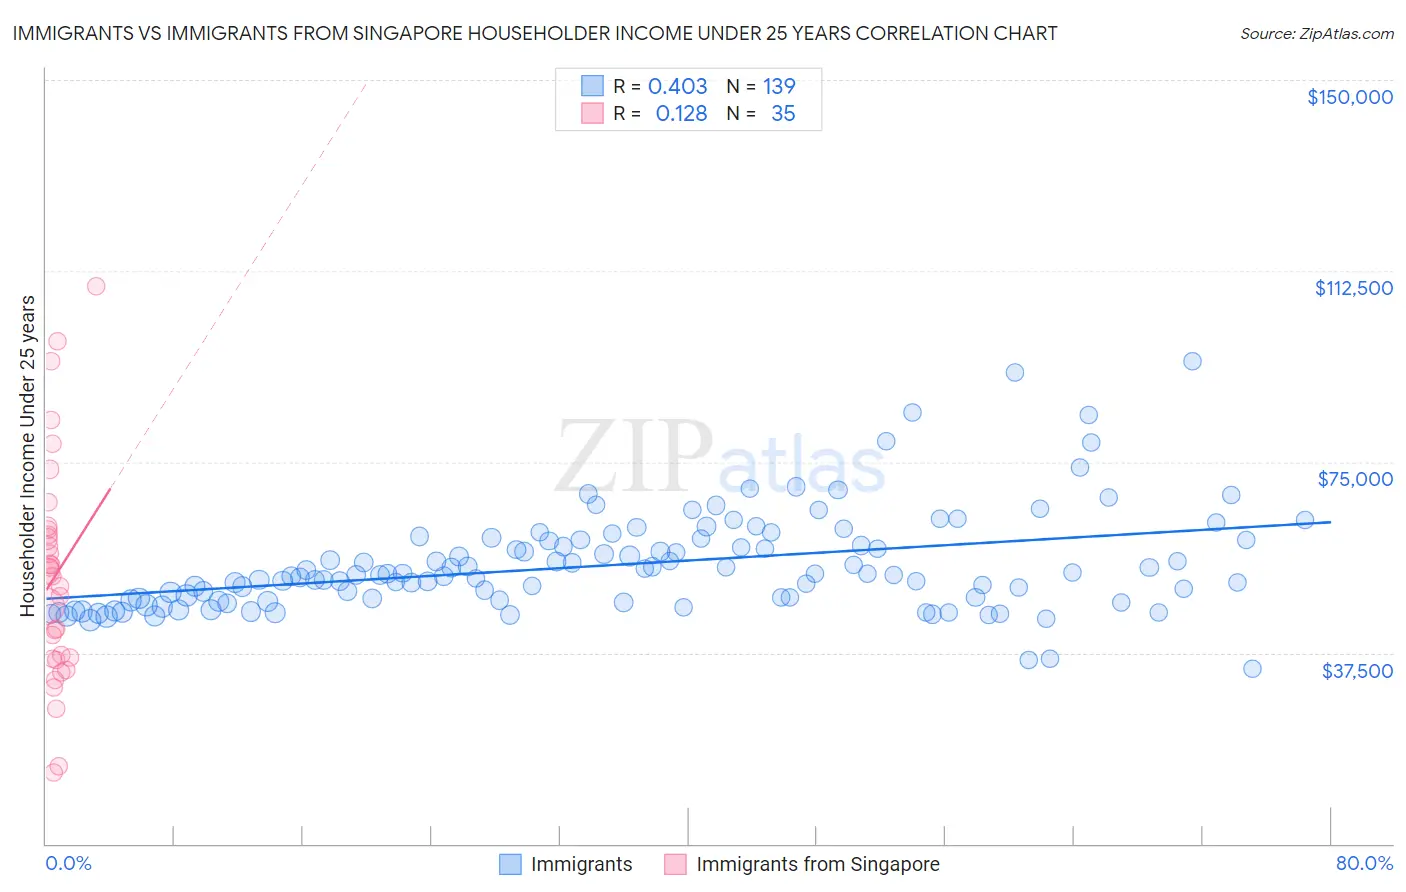 Immigrants vs Immigrants from Singapore Householder Income Under 25 years